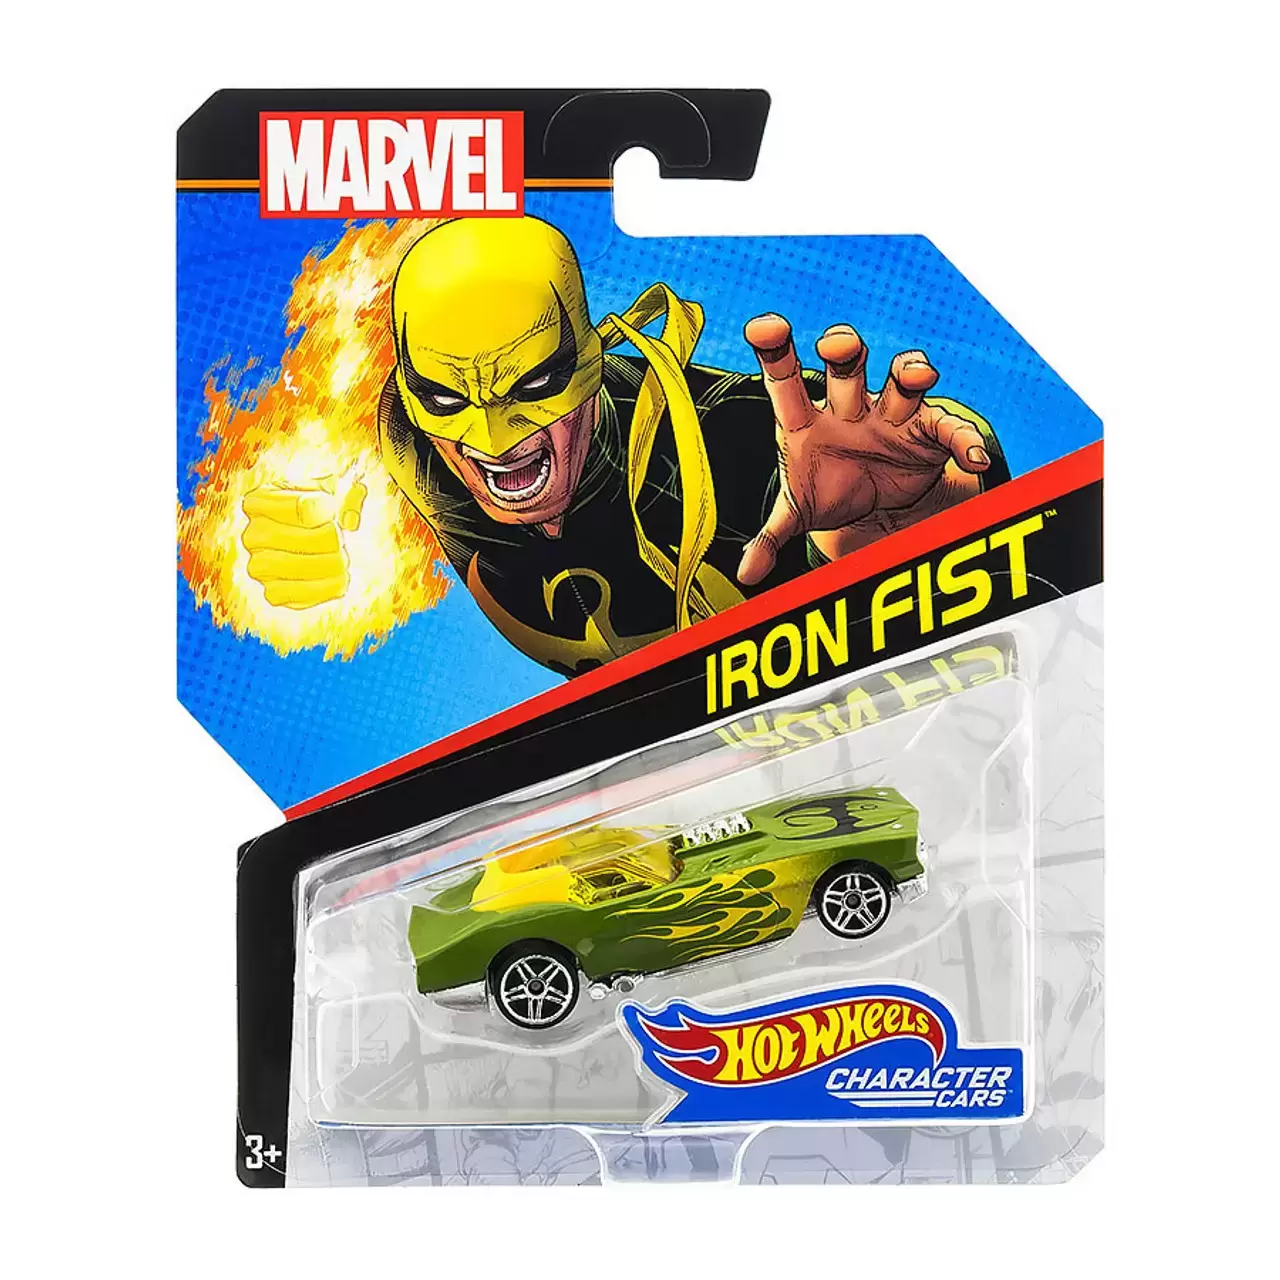 Marvel Character Cars - Iron Fist